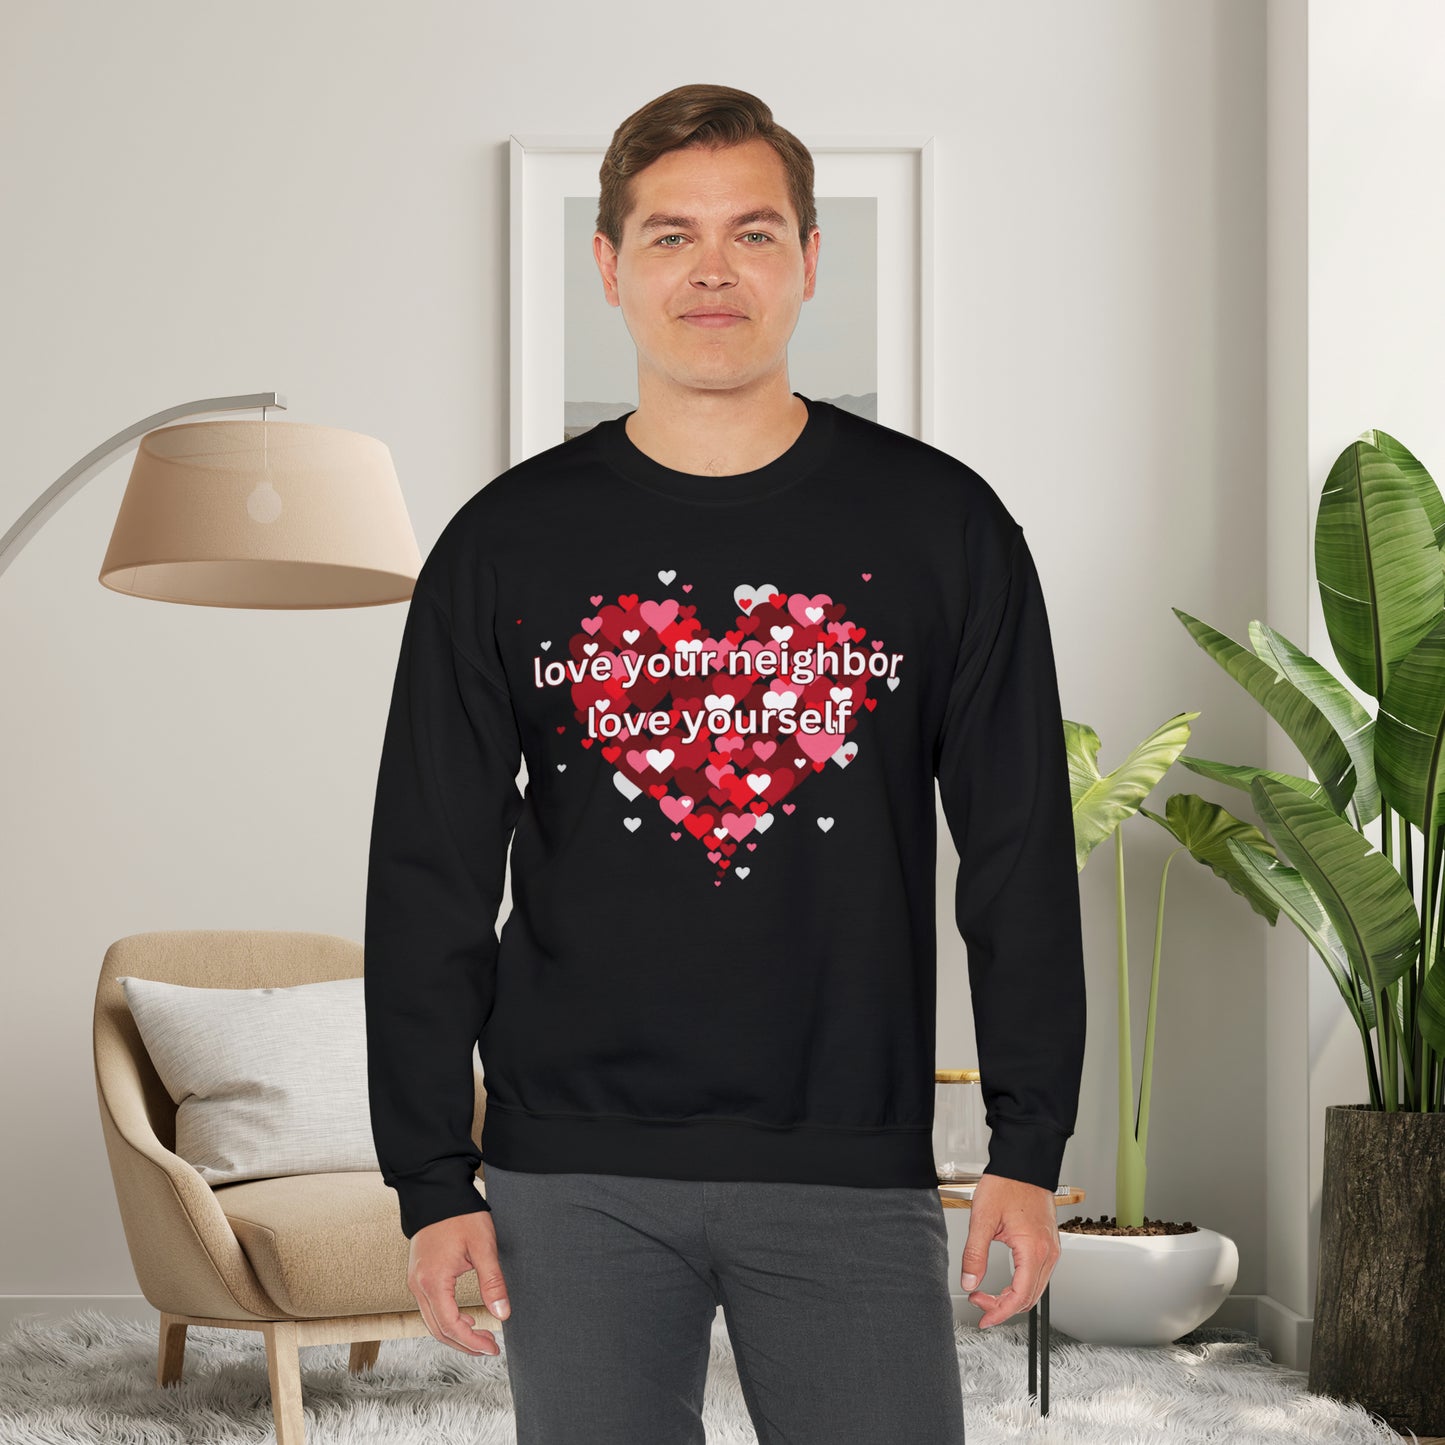 “love your neighbor love yourself” on top of a beautiful heart of hearts. Give the gift of this Unisex Heavy Blend™ Crewneck Sweatshirt or get one for yourself.